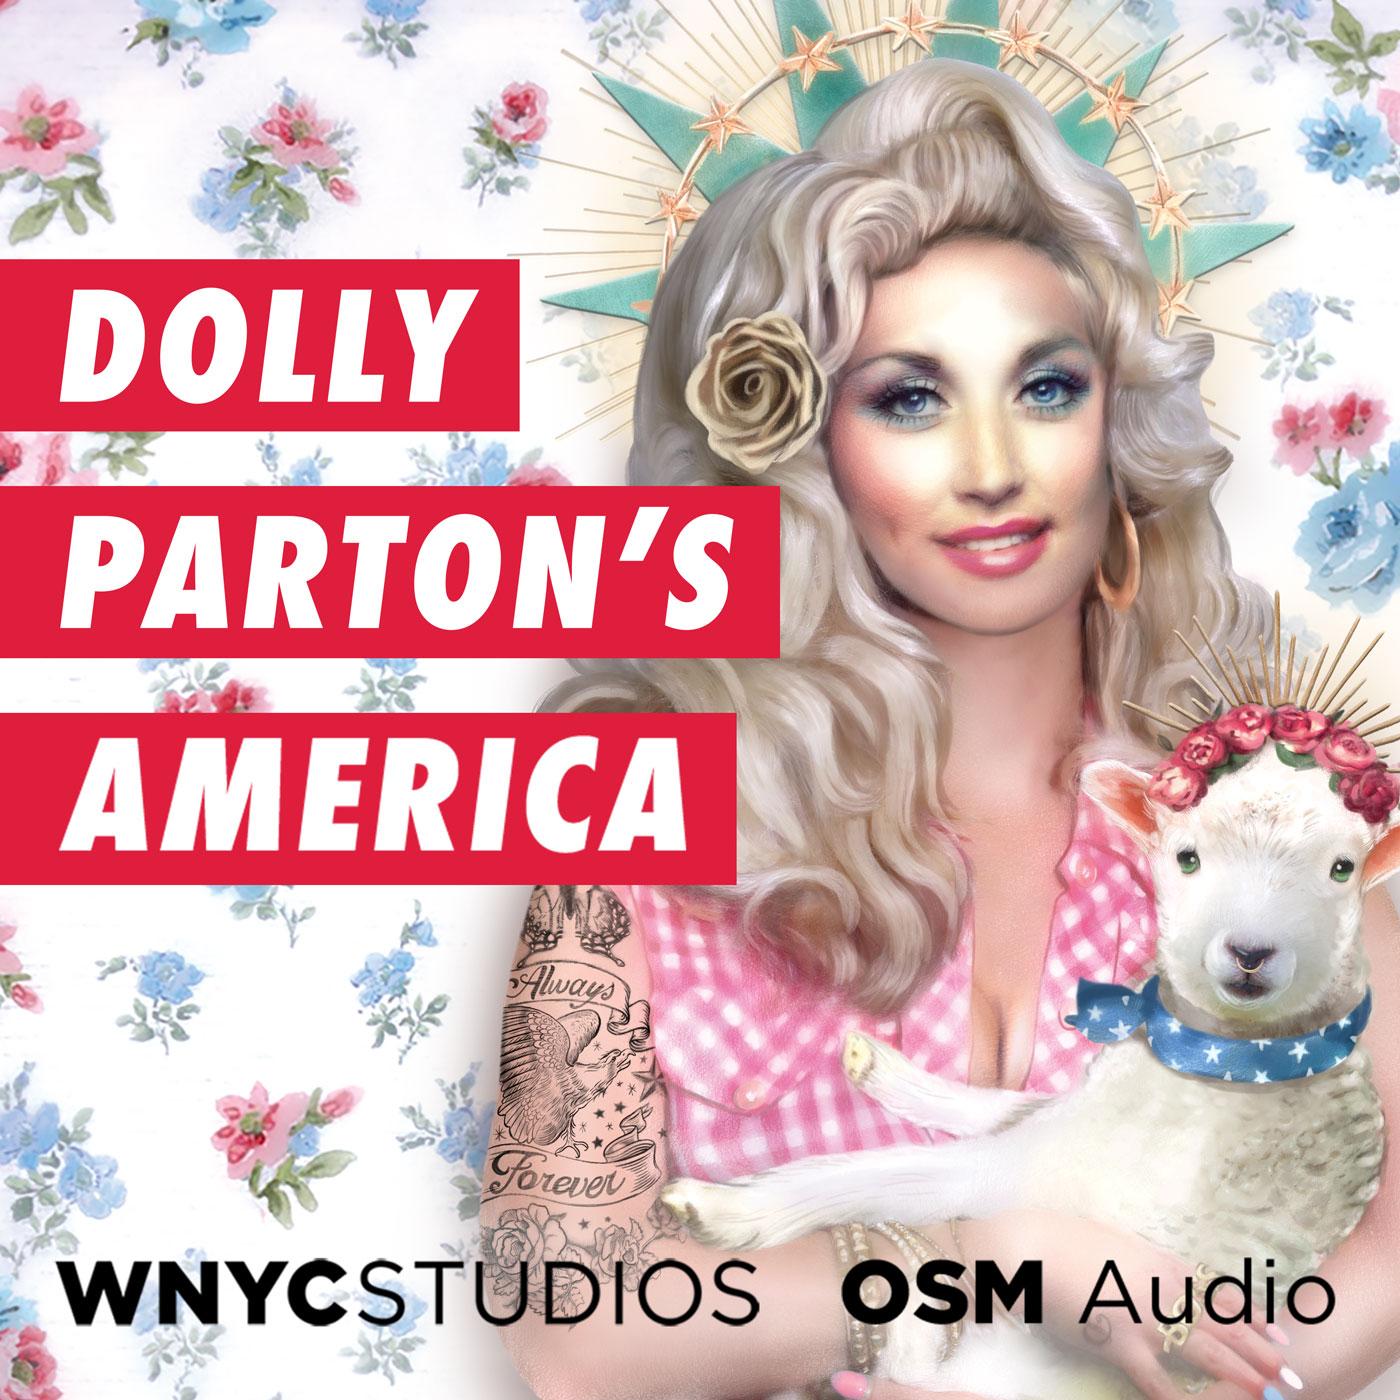 Dolly Parton's America podcast show image